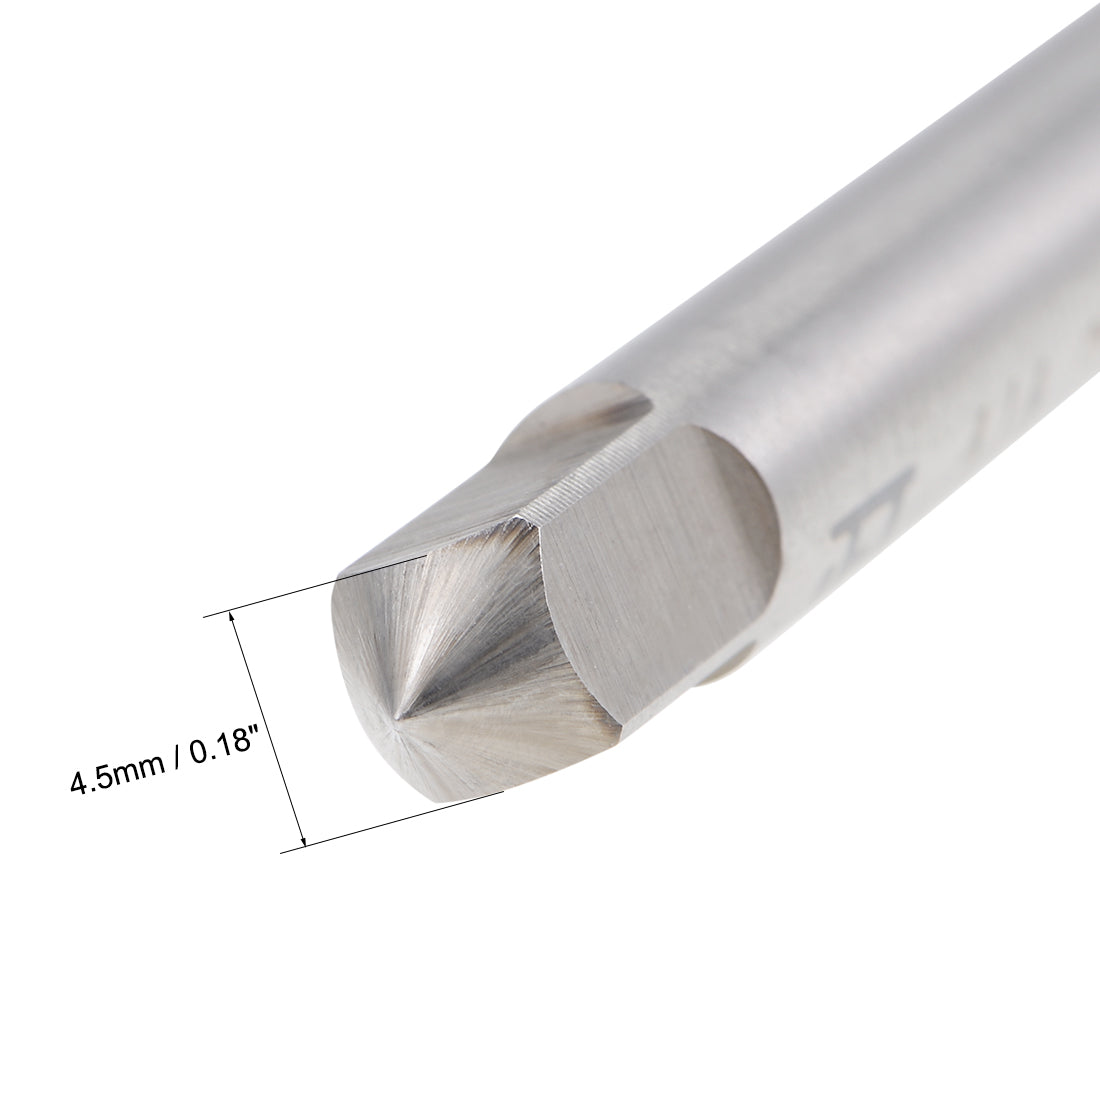 uxcell Uxcell Machine Tap Thread Pitch 3 Straight Flutes H2 High Speed Steel 2pcs